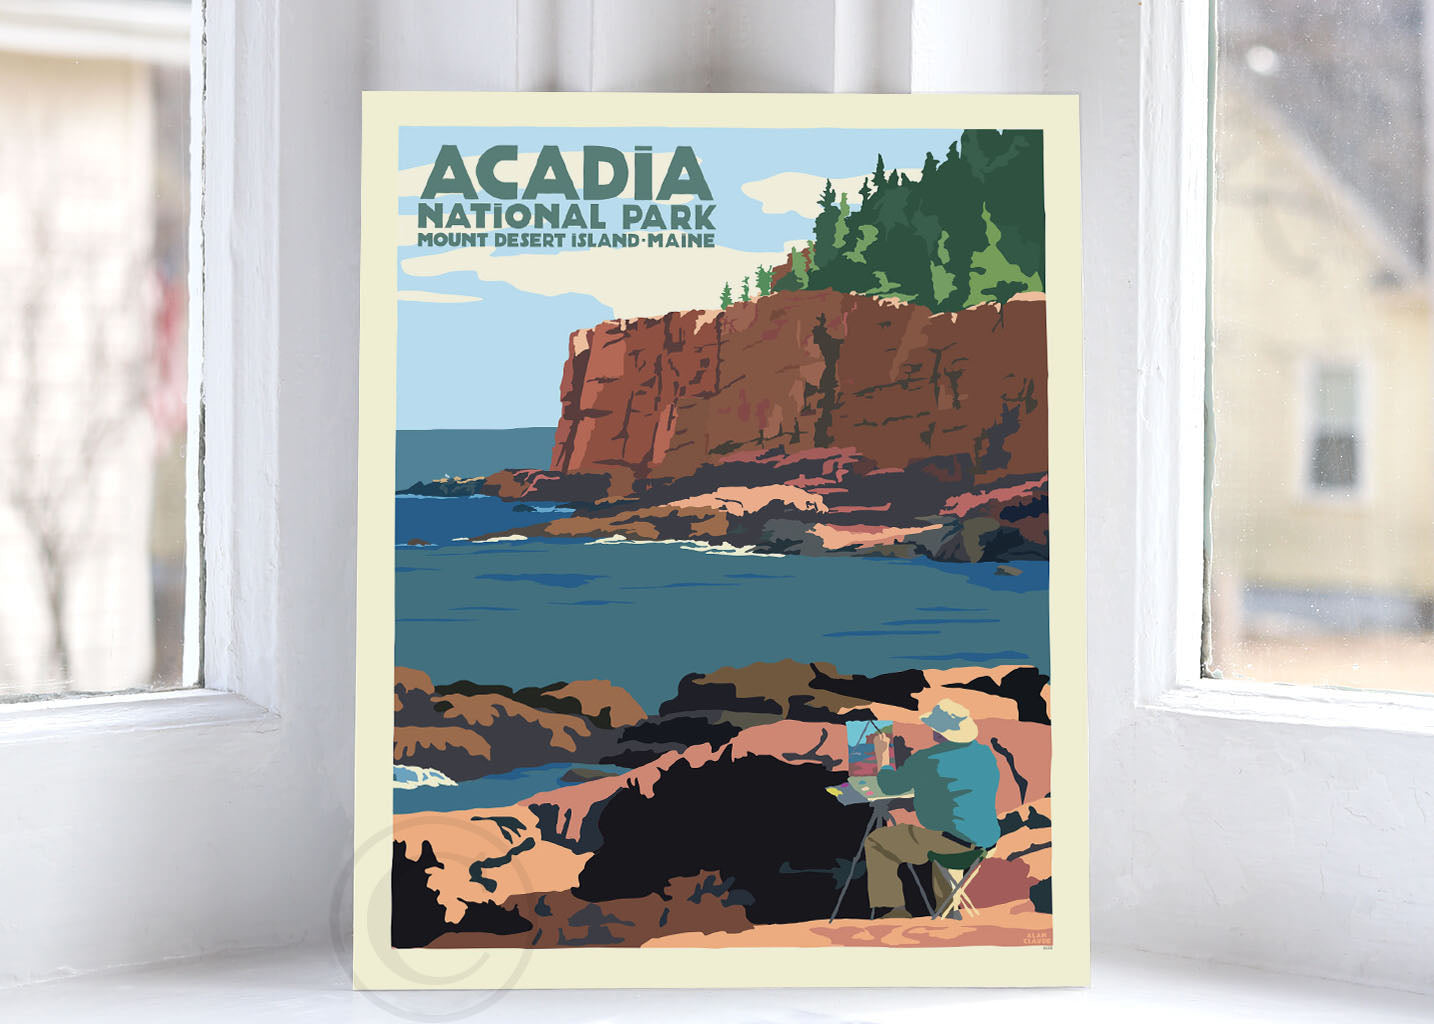 Painting In Acadia National Park Art Print 8" x 10" Wall Poster By Alan Claude - Maine